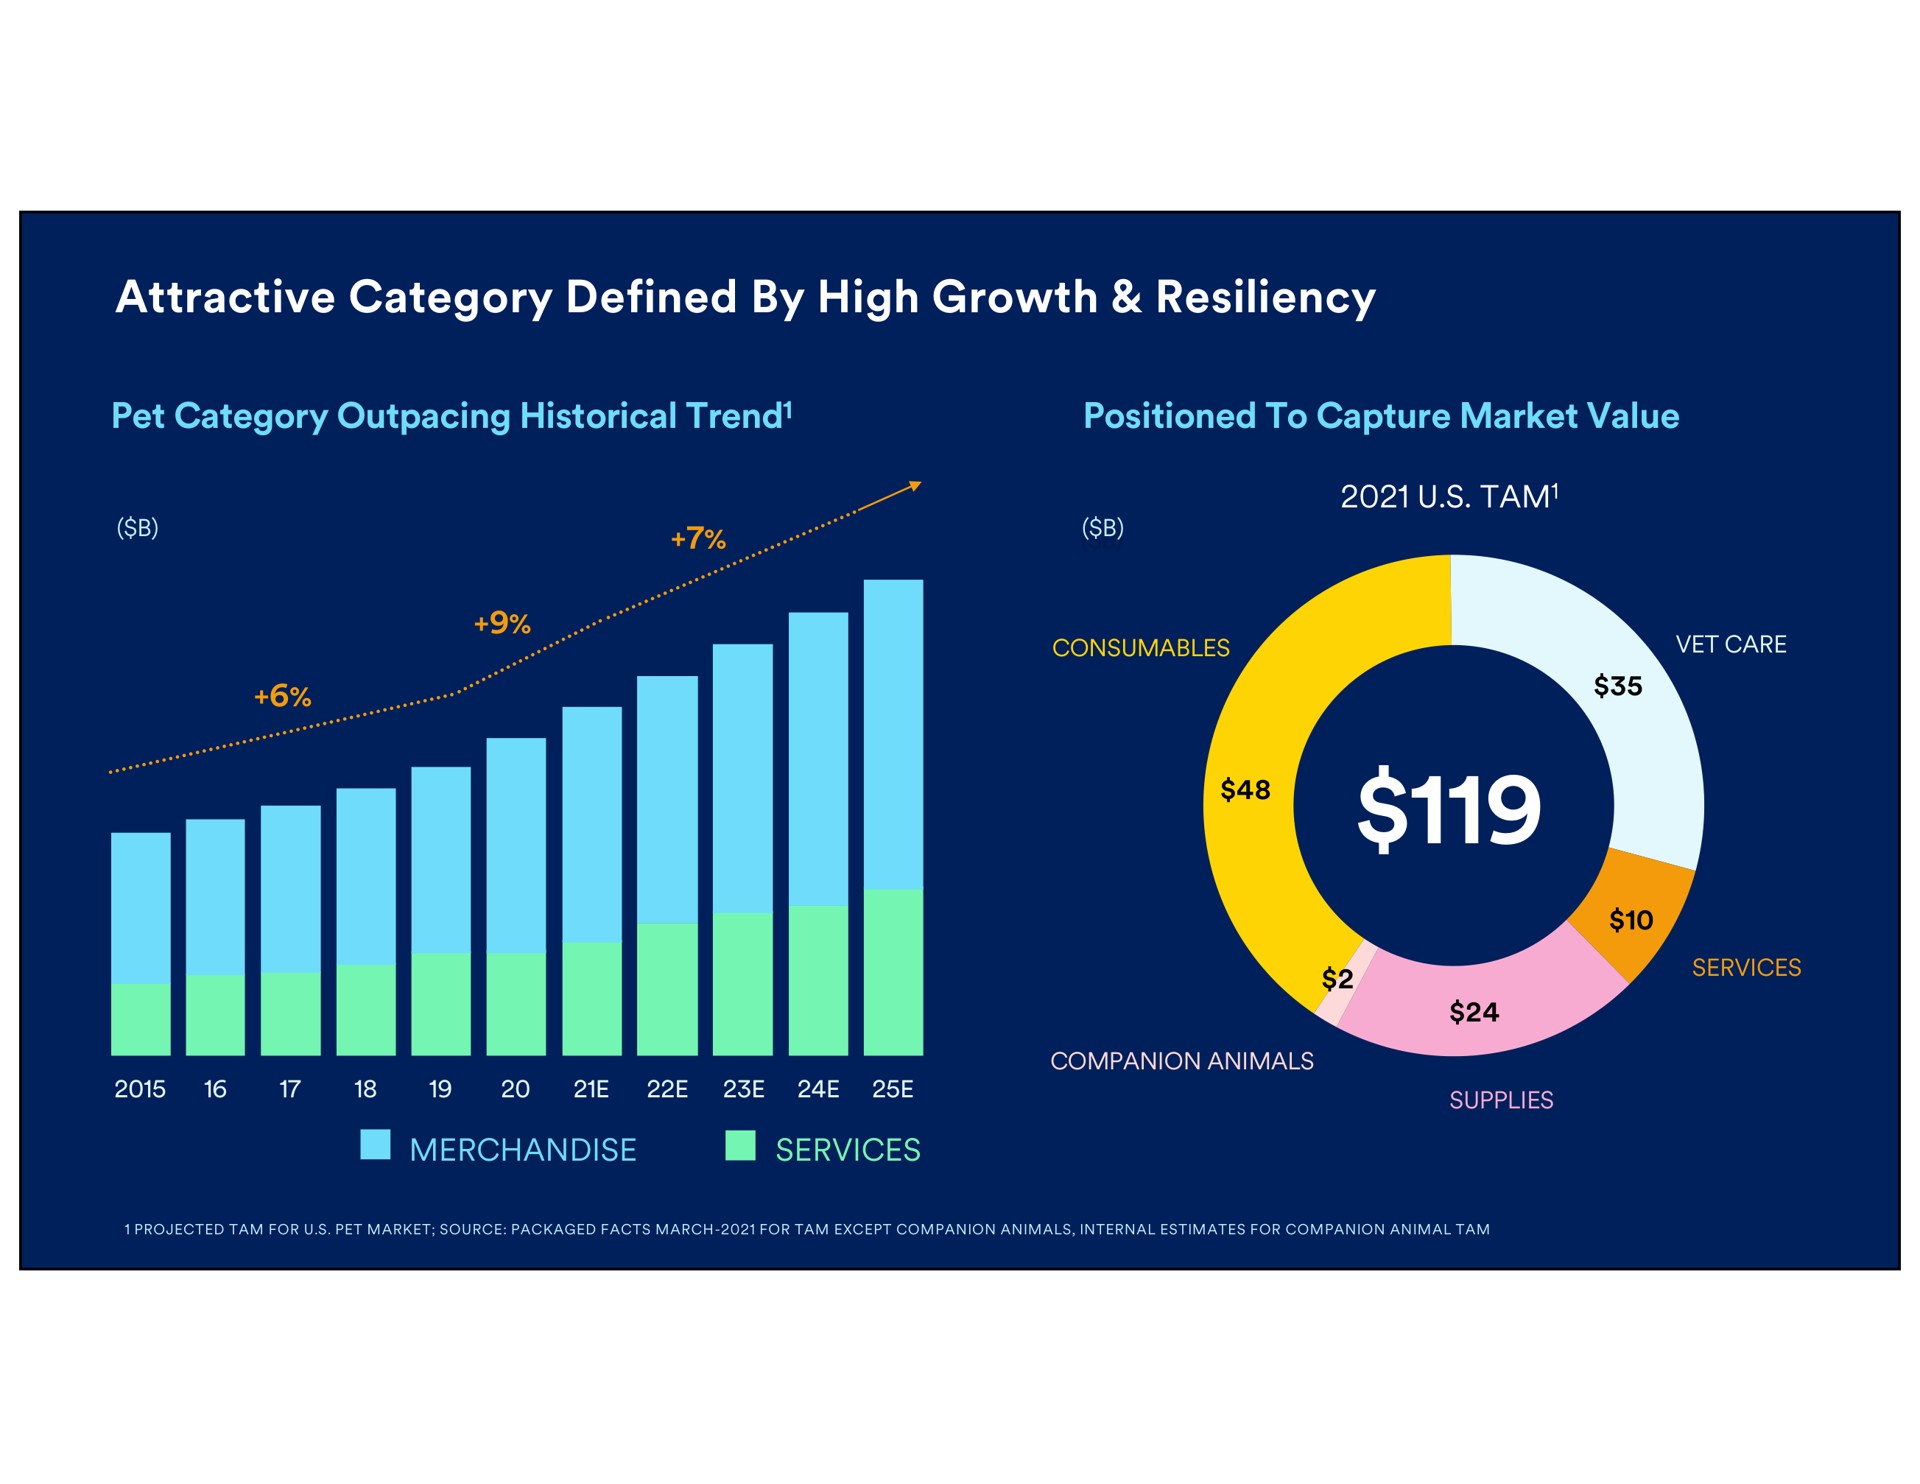 attractive category defined by high growth resiliency pet outpacing historical trend positioned to capture market value tam hos a vet care projected tam for pet market source packaged facts march for tam except companion animals internal estimates for companion animal tam me merchandise companion animals services a supplies | Petco